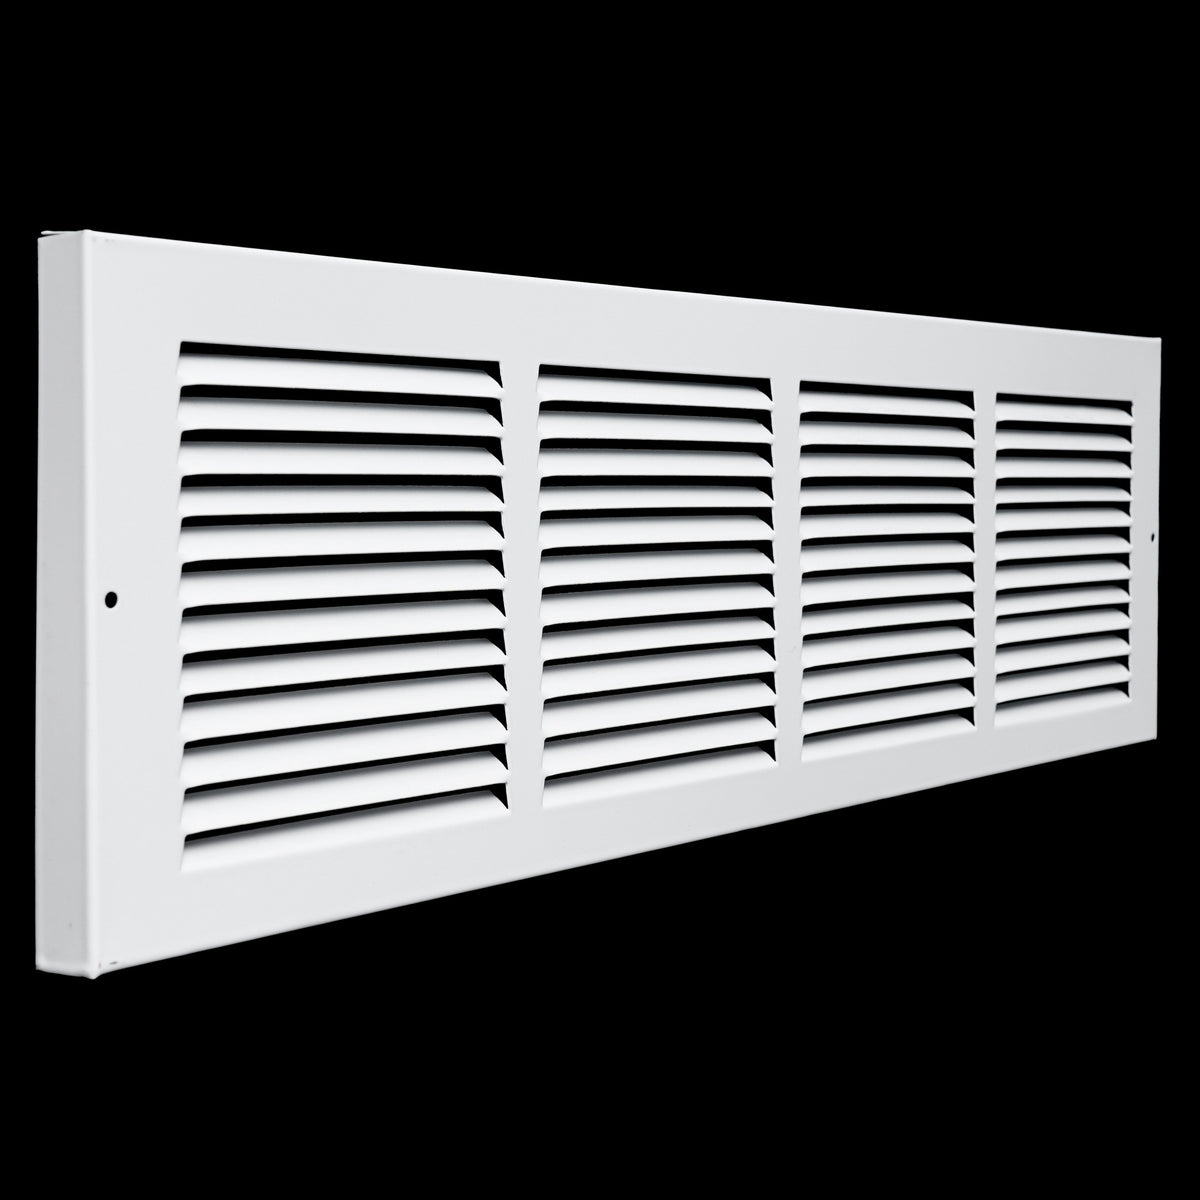 airgrilles 24"w x 6"h baseboard return air grille   vent cover grill   7/8" margin turnback to fit baseboard   white   outer dimensions: 25.75"w x 7.75"h for 24x6 duct opening hnd-bra-wh-24x6  - 1